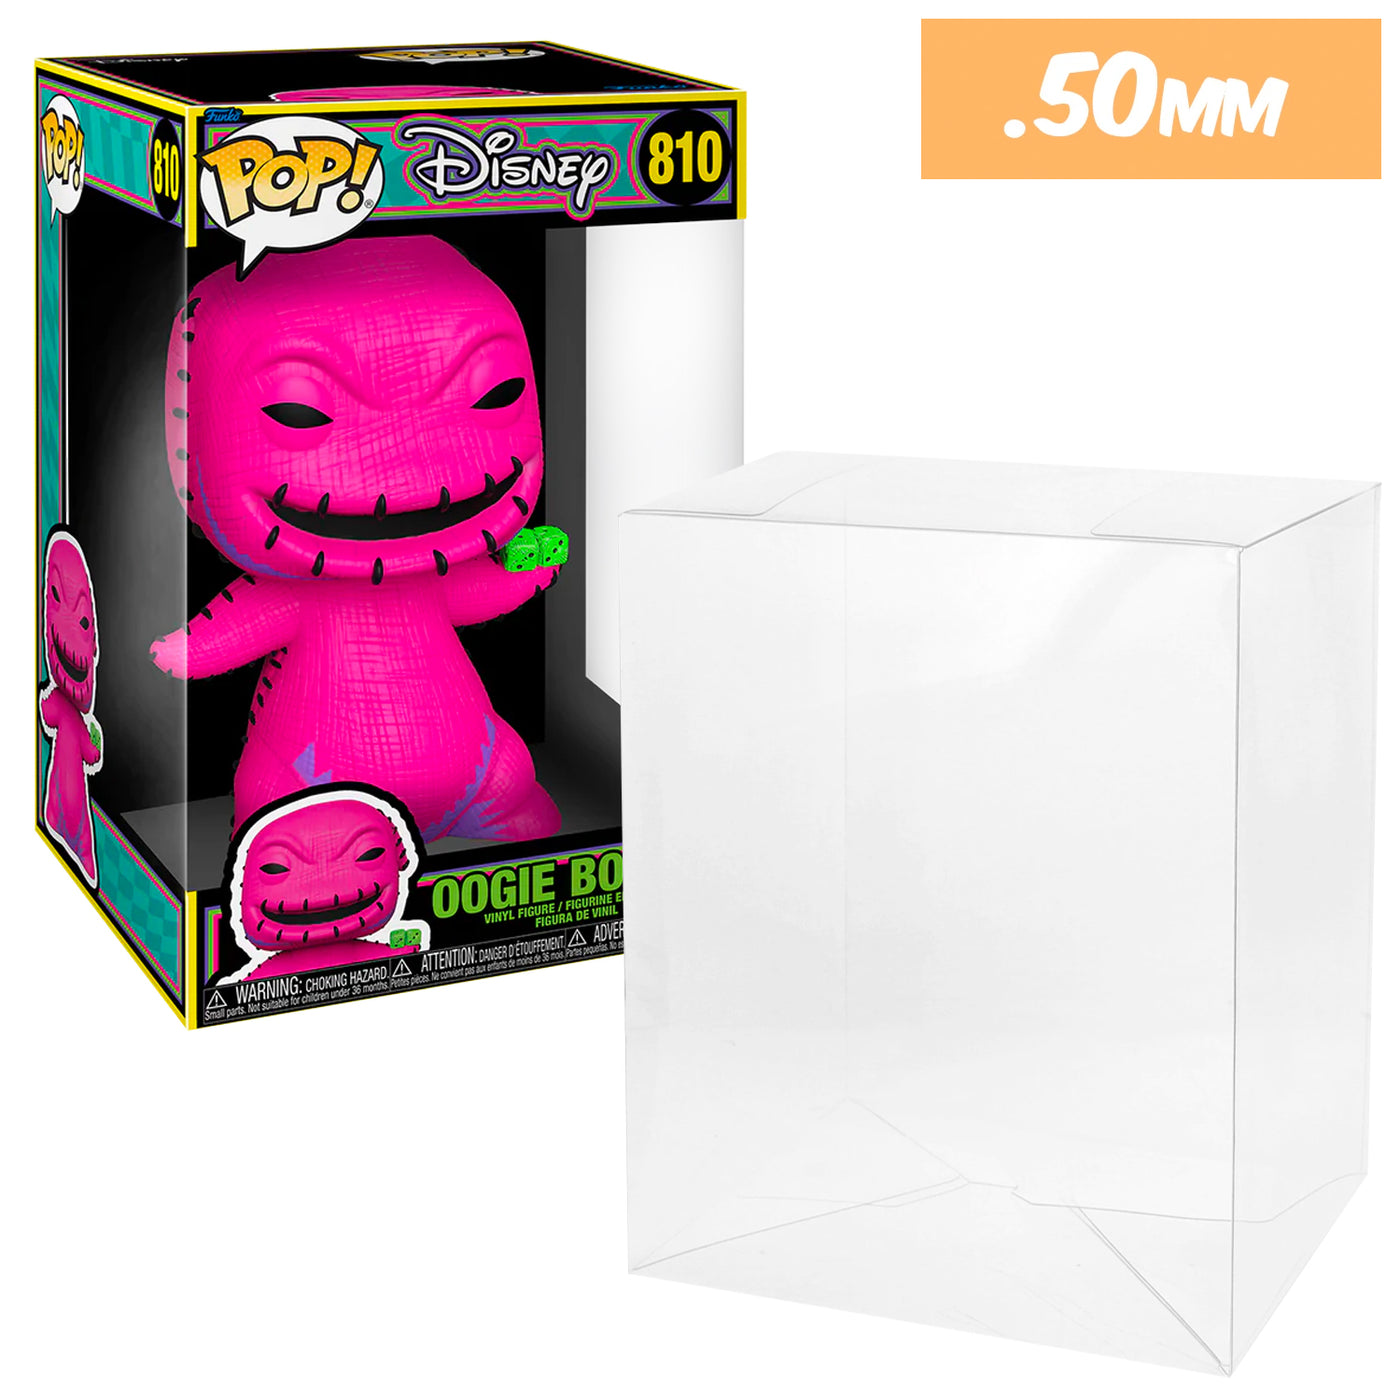 10 inch new size blacklight oogie boogie nightmare best funko pop protectors thick strong uv scratch flat top stack vinyl display geek plastic shield vaulted eco armor fits collect protect display case kollector protector